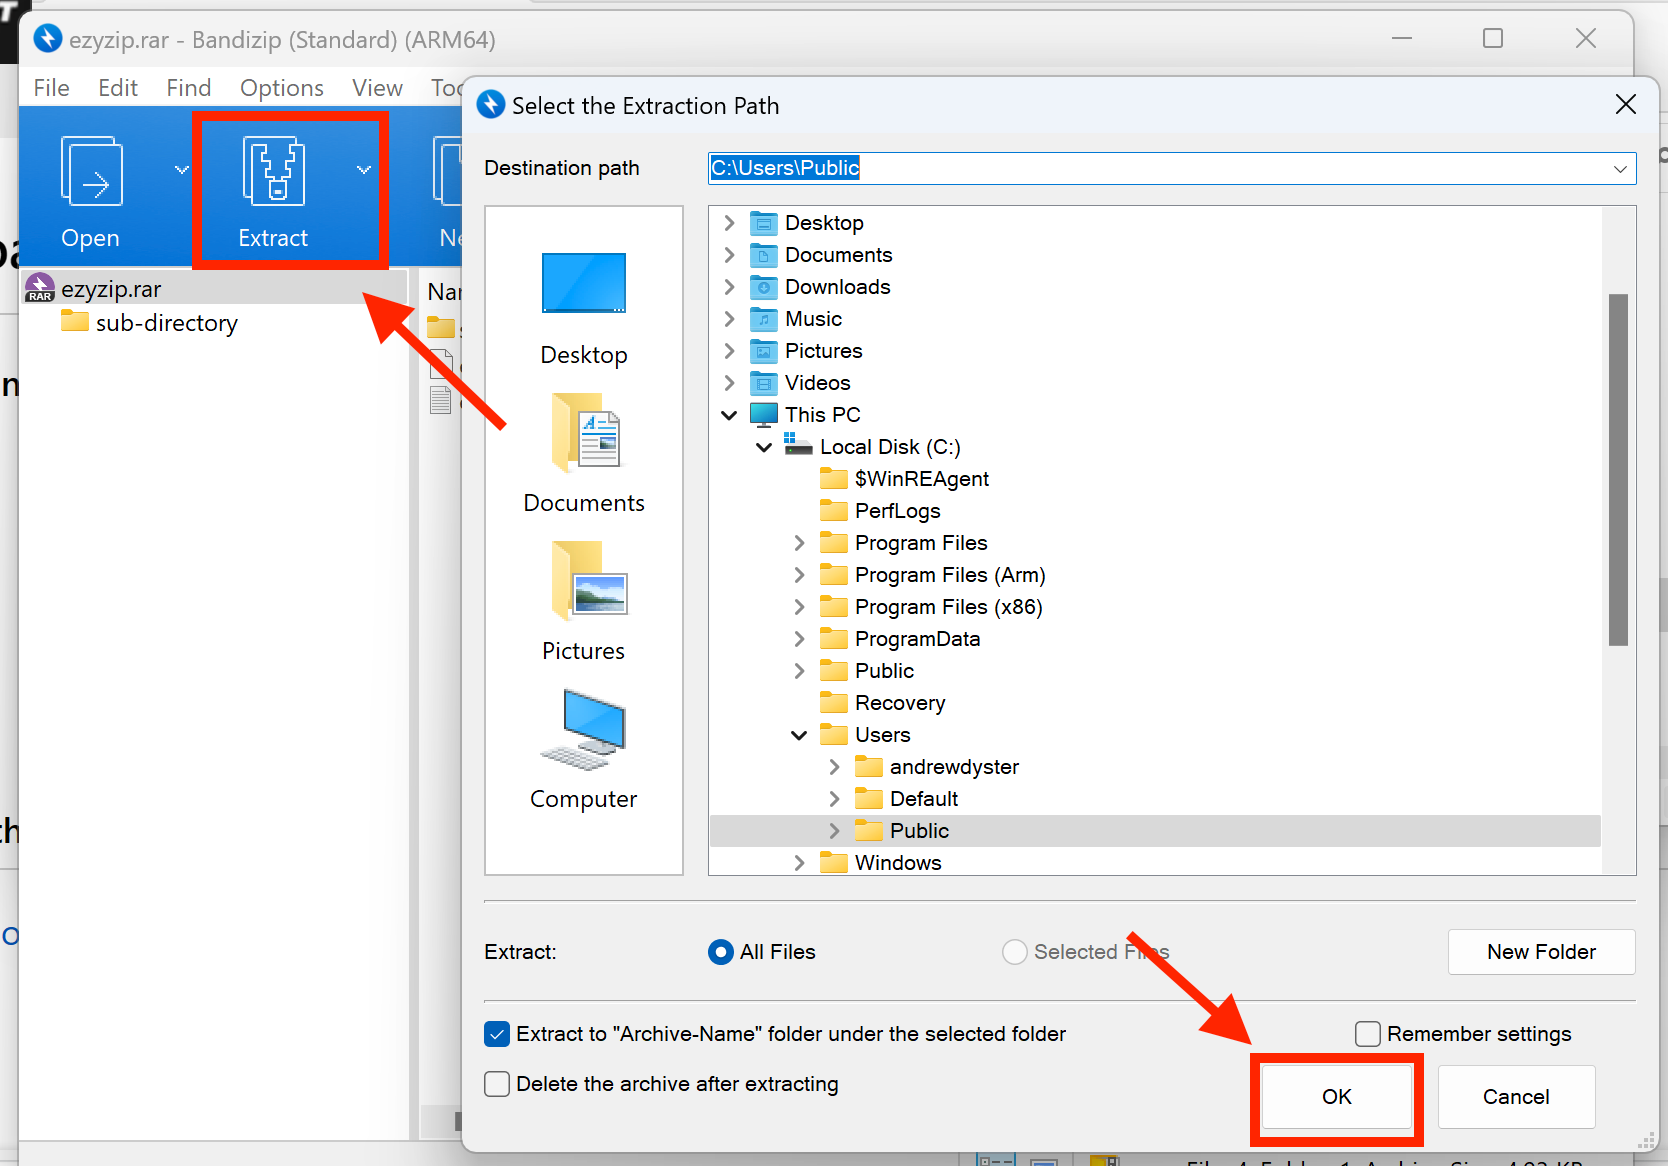 How To Open 7Z Files Using Bandizip: Step 5